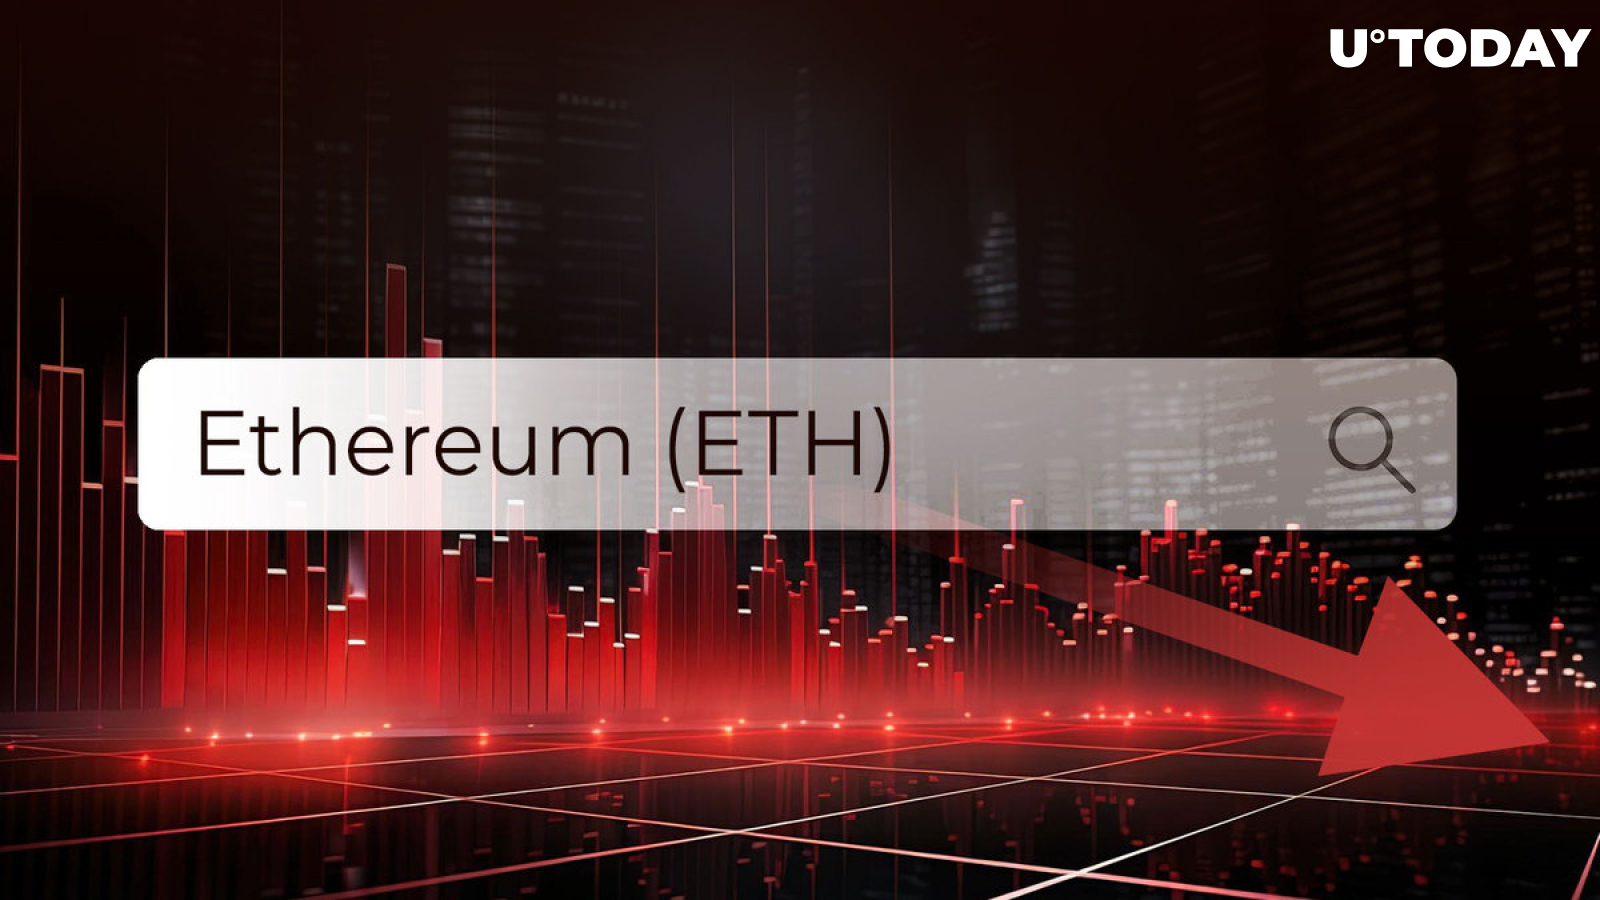 Ethereum (ETH) Popularity Drops to Late 2020 Levels Based on This Indicator